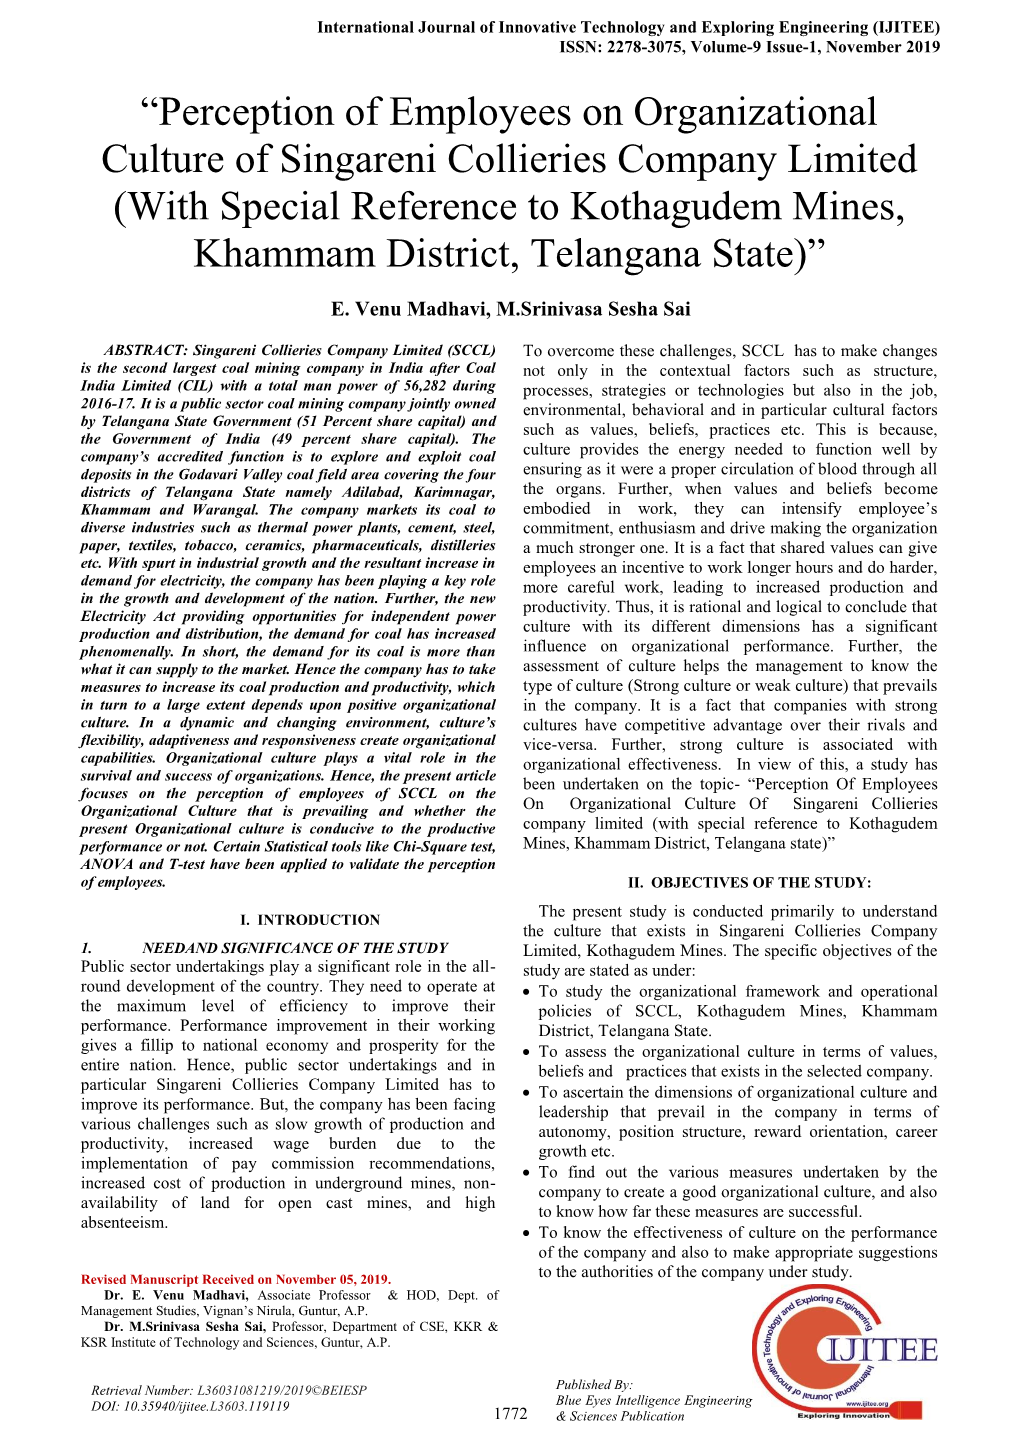 Perception of Employees on Organizational Culture of Singareni Collieries Company Limited (With Special Reference to Kothagud